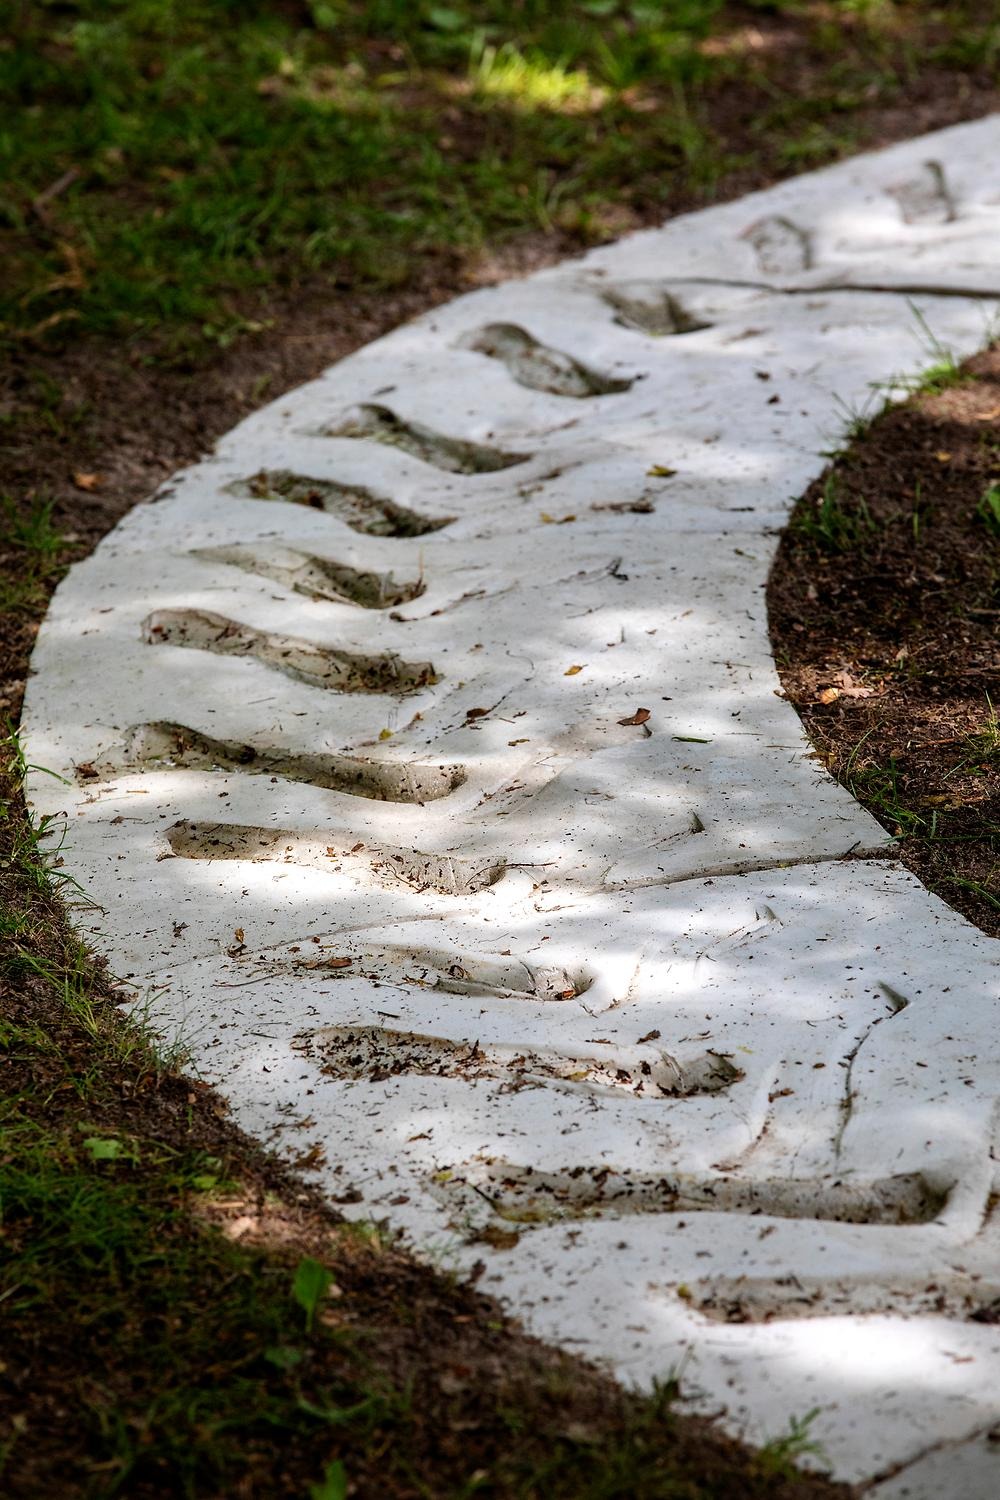 Close-up of a large circle buried in the grass in a park. The circle is made of concrete and traces of a tractor tire are visible in the concrete, which makes the entire work of art look like a tractor tire made of concrete.